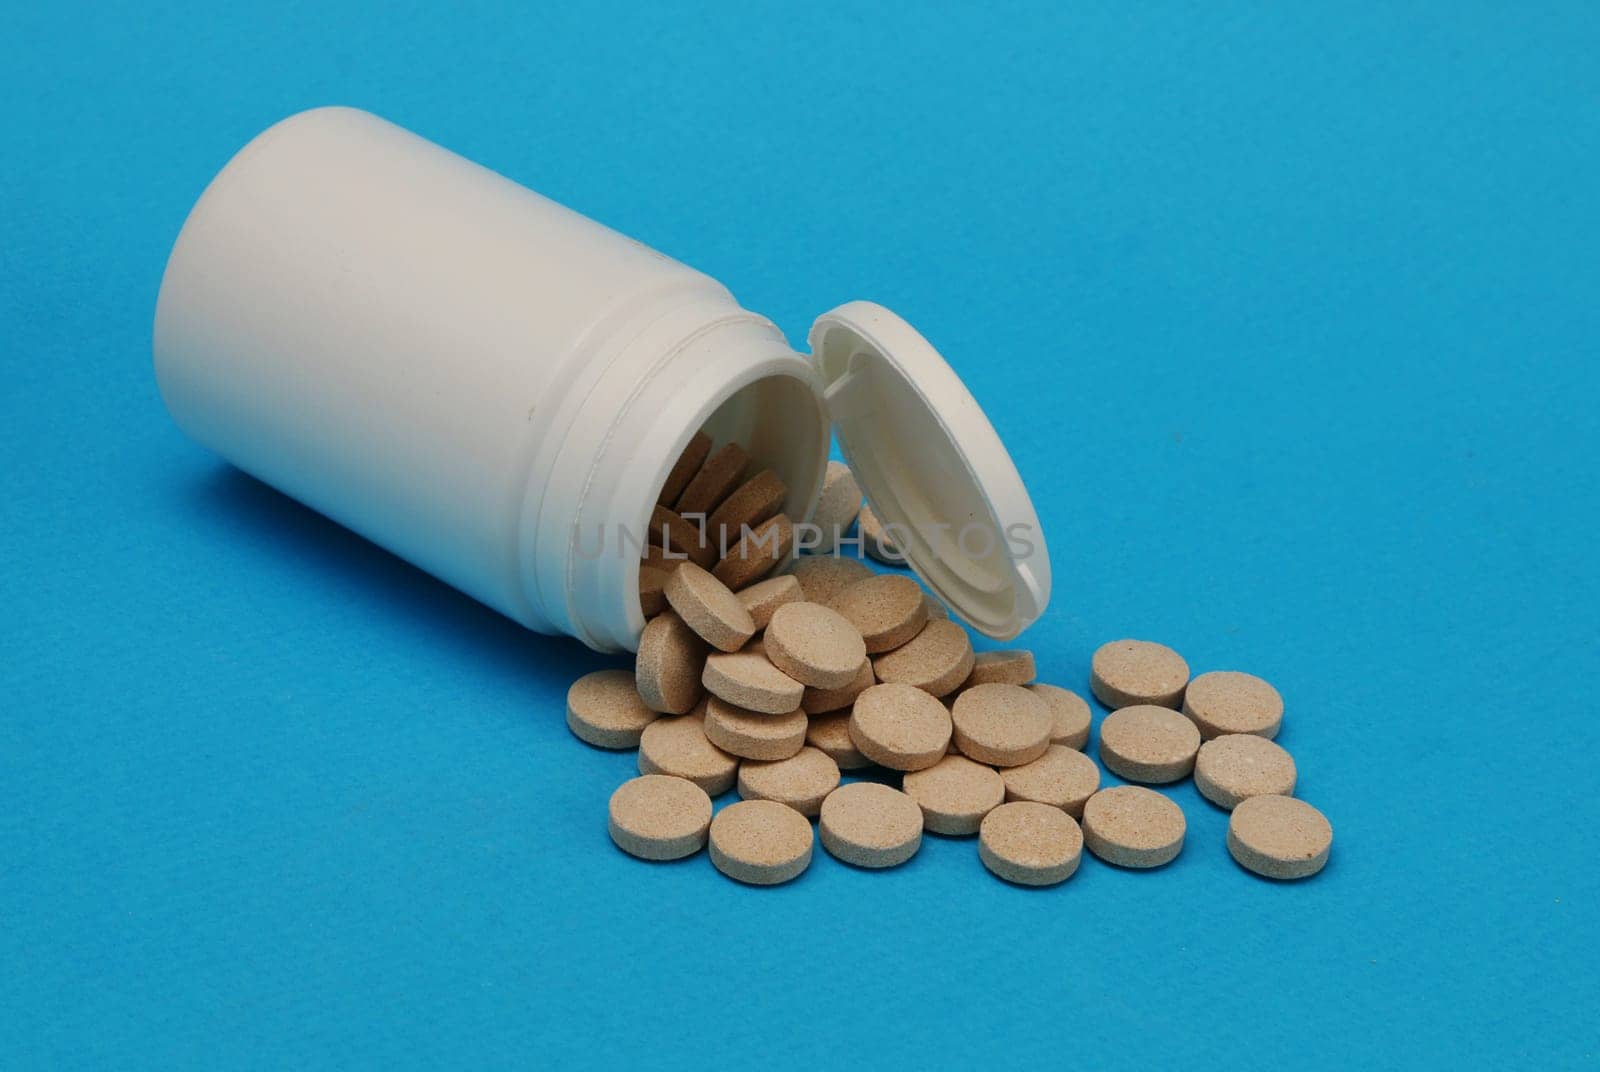 Light brown medicine capsules from a plastic medicine bottle on a blue background. by gelog67